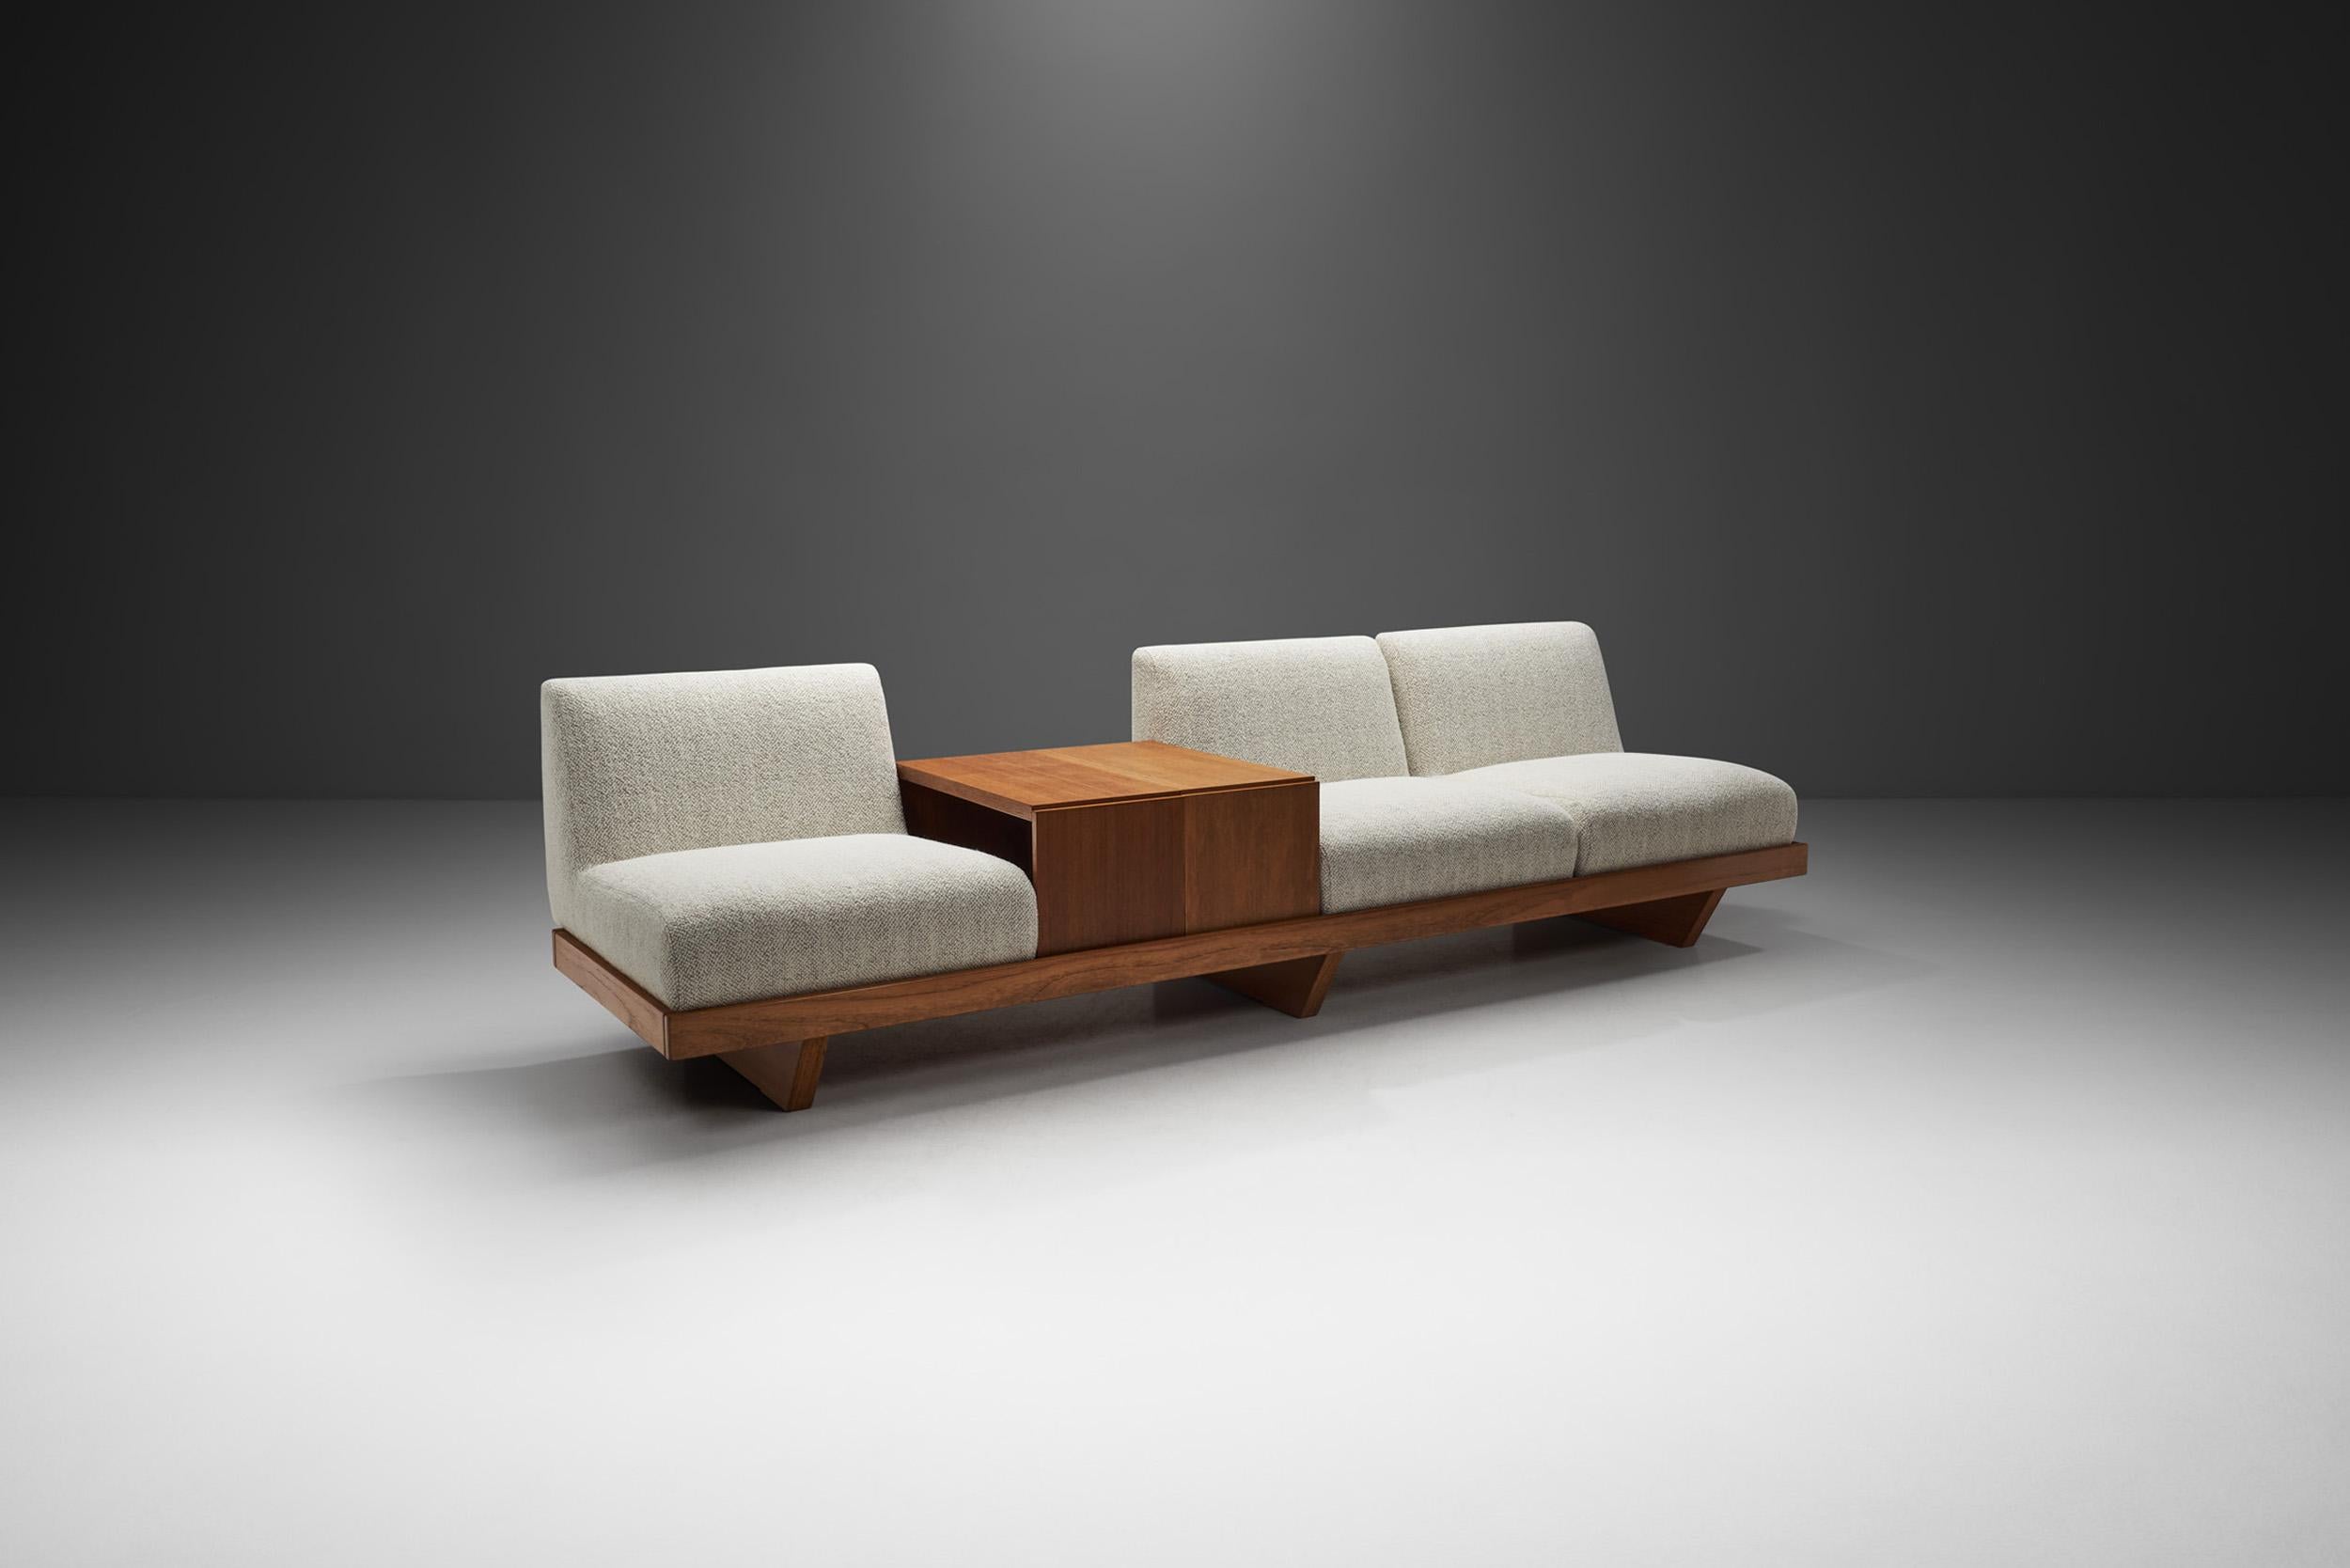 Danish design is a remarkable combination of concern for functionality and materiality melded with a desire for outmost comfort. With a modern but also retro look, this three-seater has a charm that is delightfully unique.

Danish Modern designs are